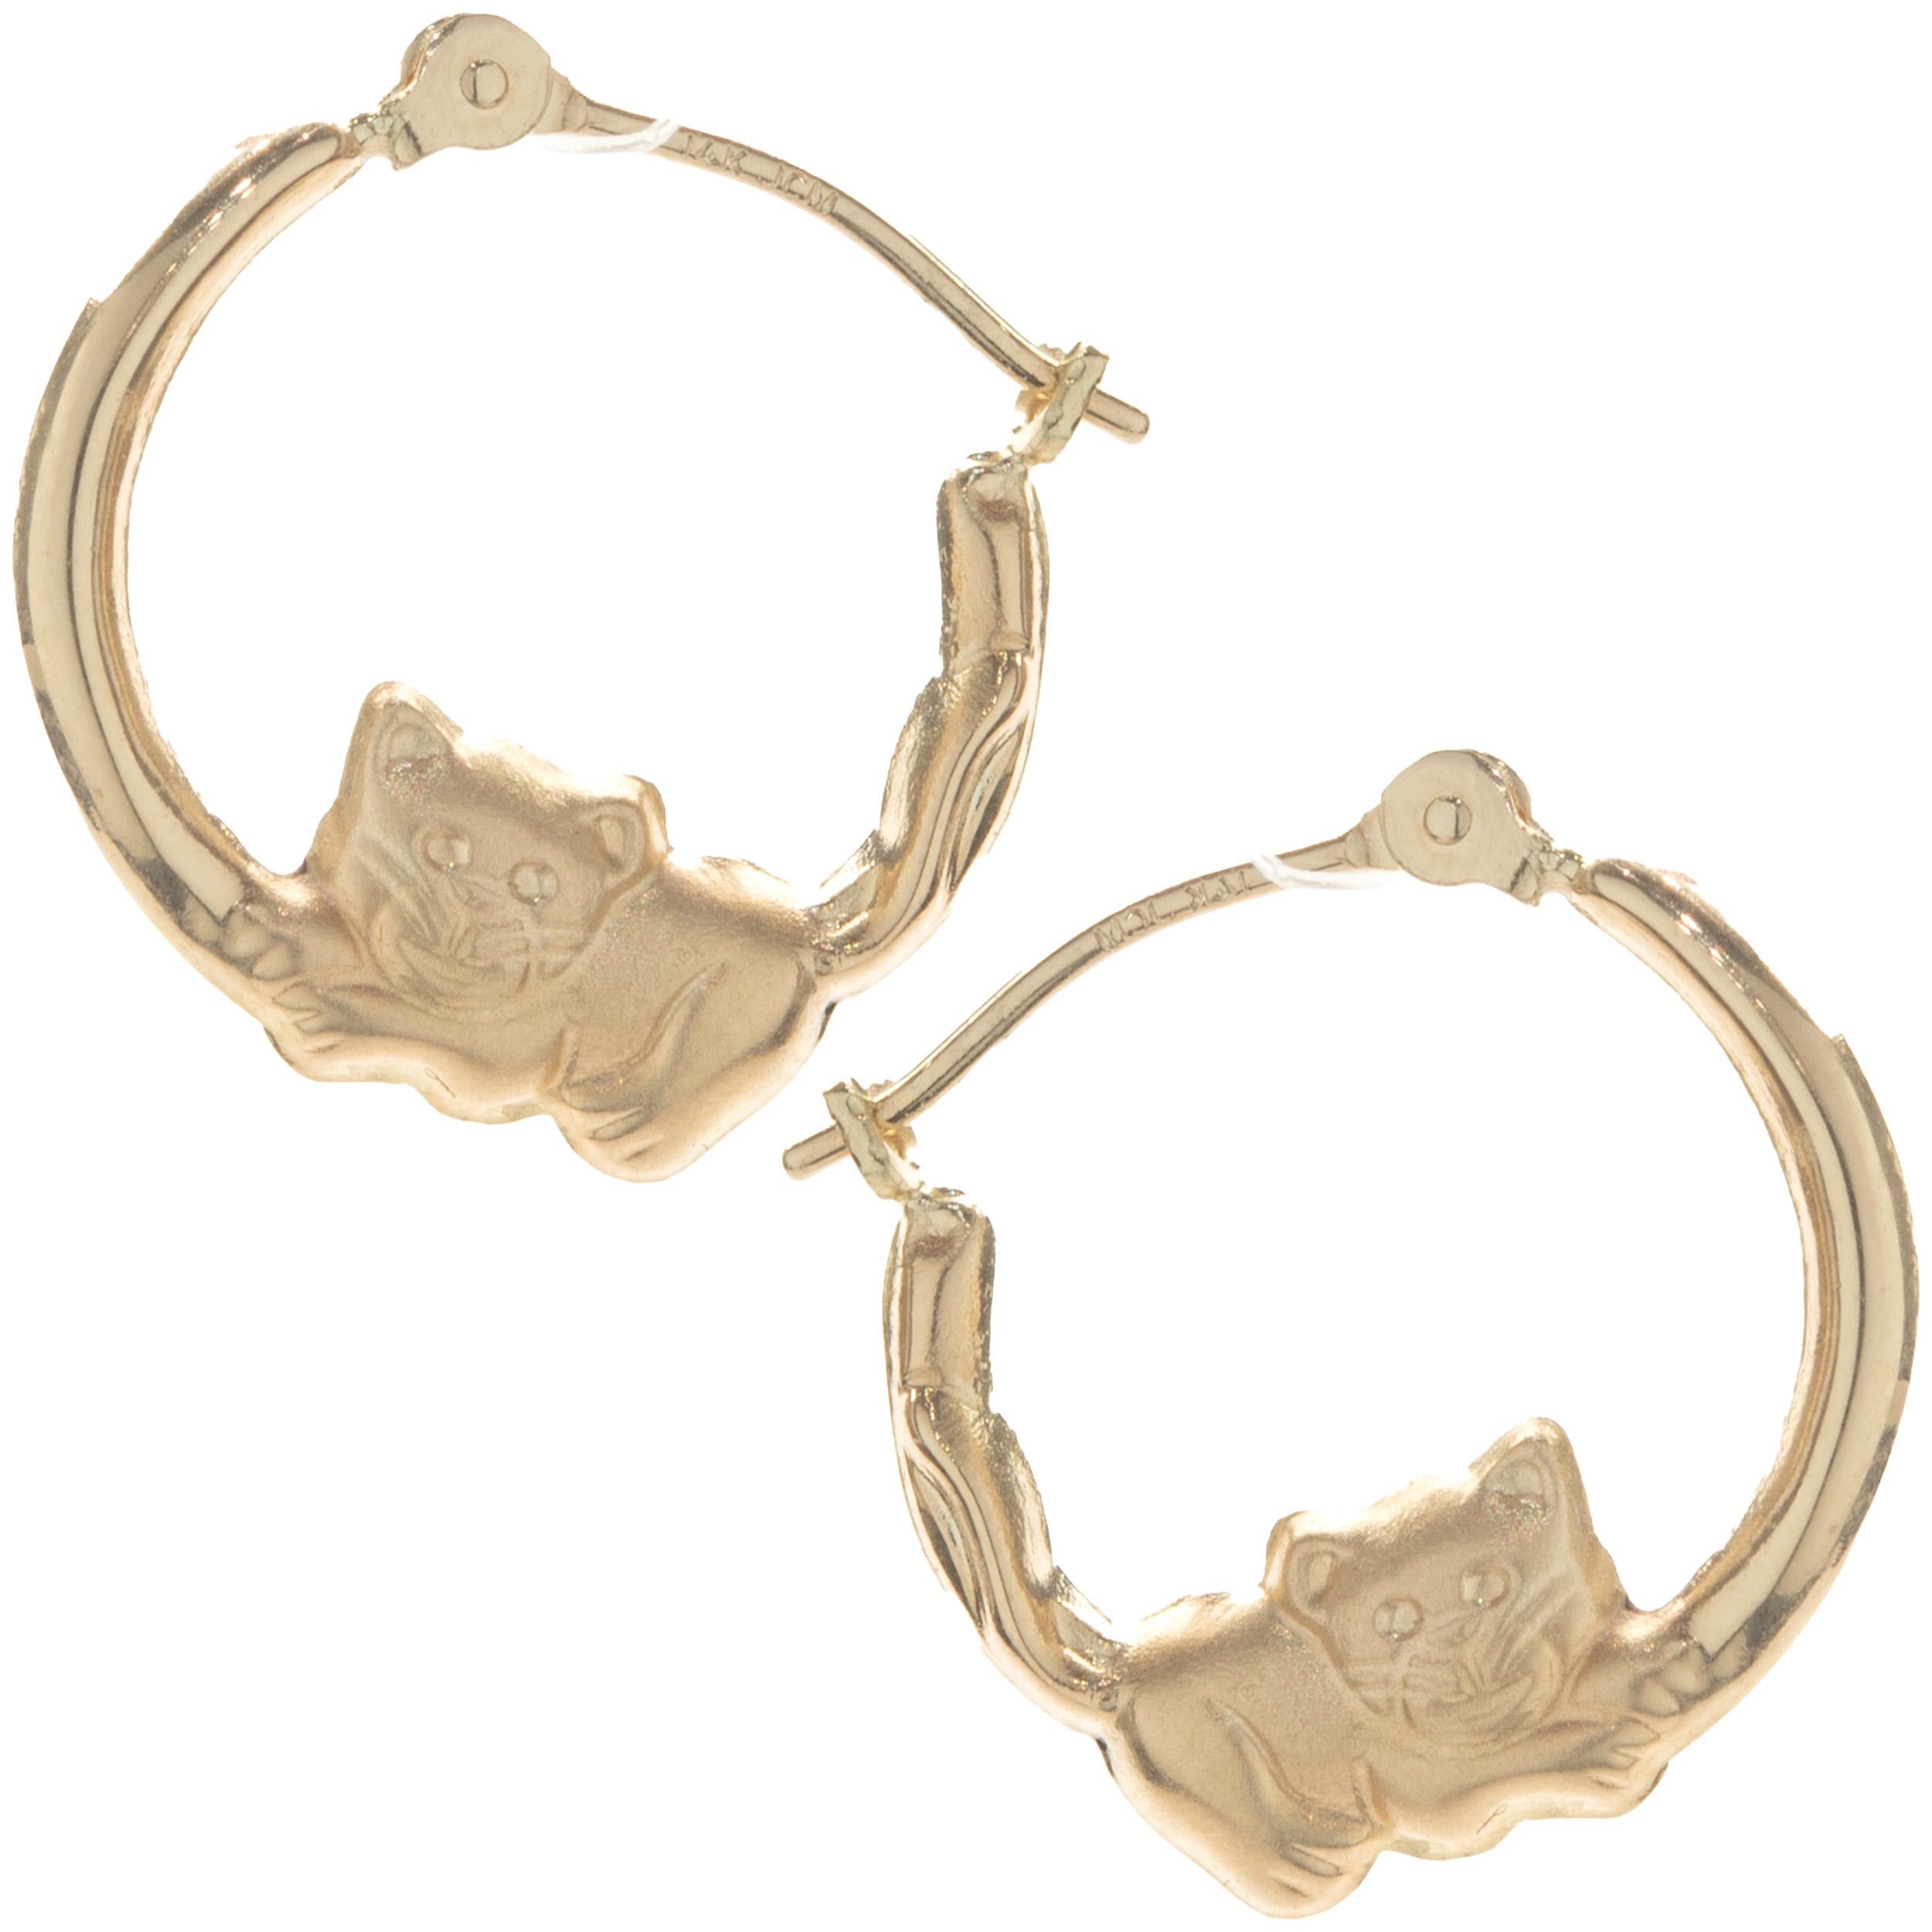 Material: 14K yellow gold
Dimensions: earrings measure 15mm in length
Weight:  0.8 grams